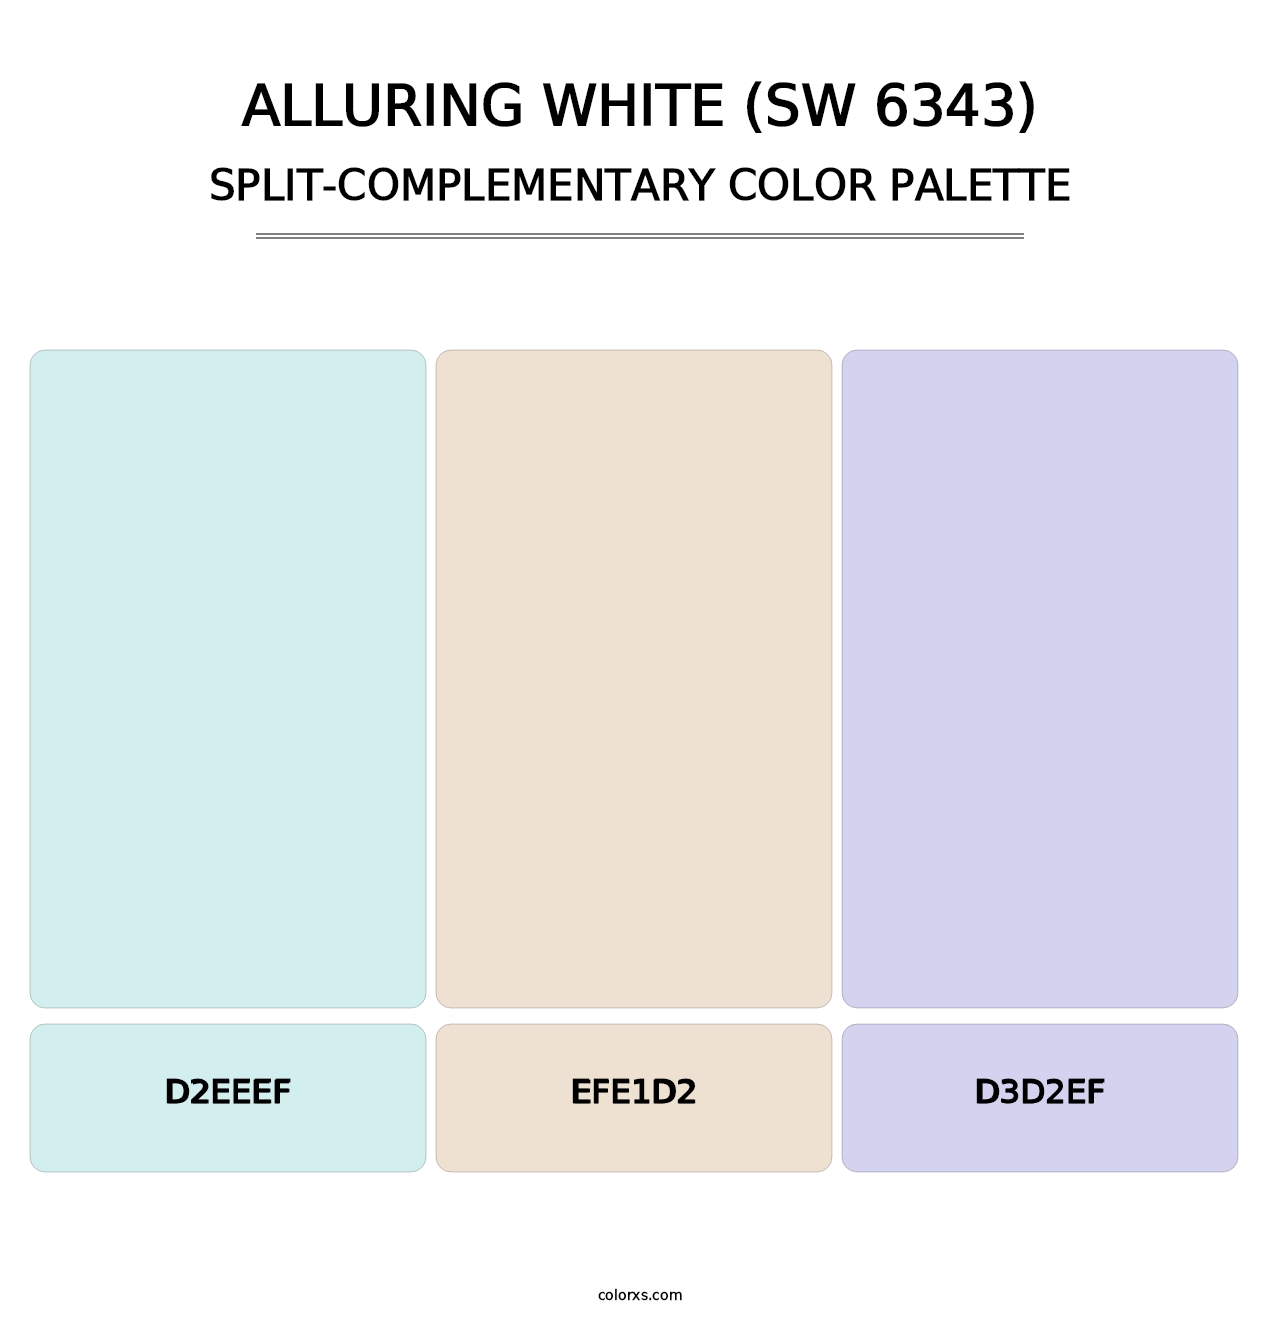 Alluring White (SW 6343) - Split-Complementary Color Palette